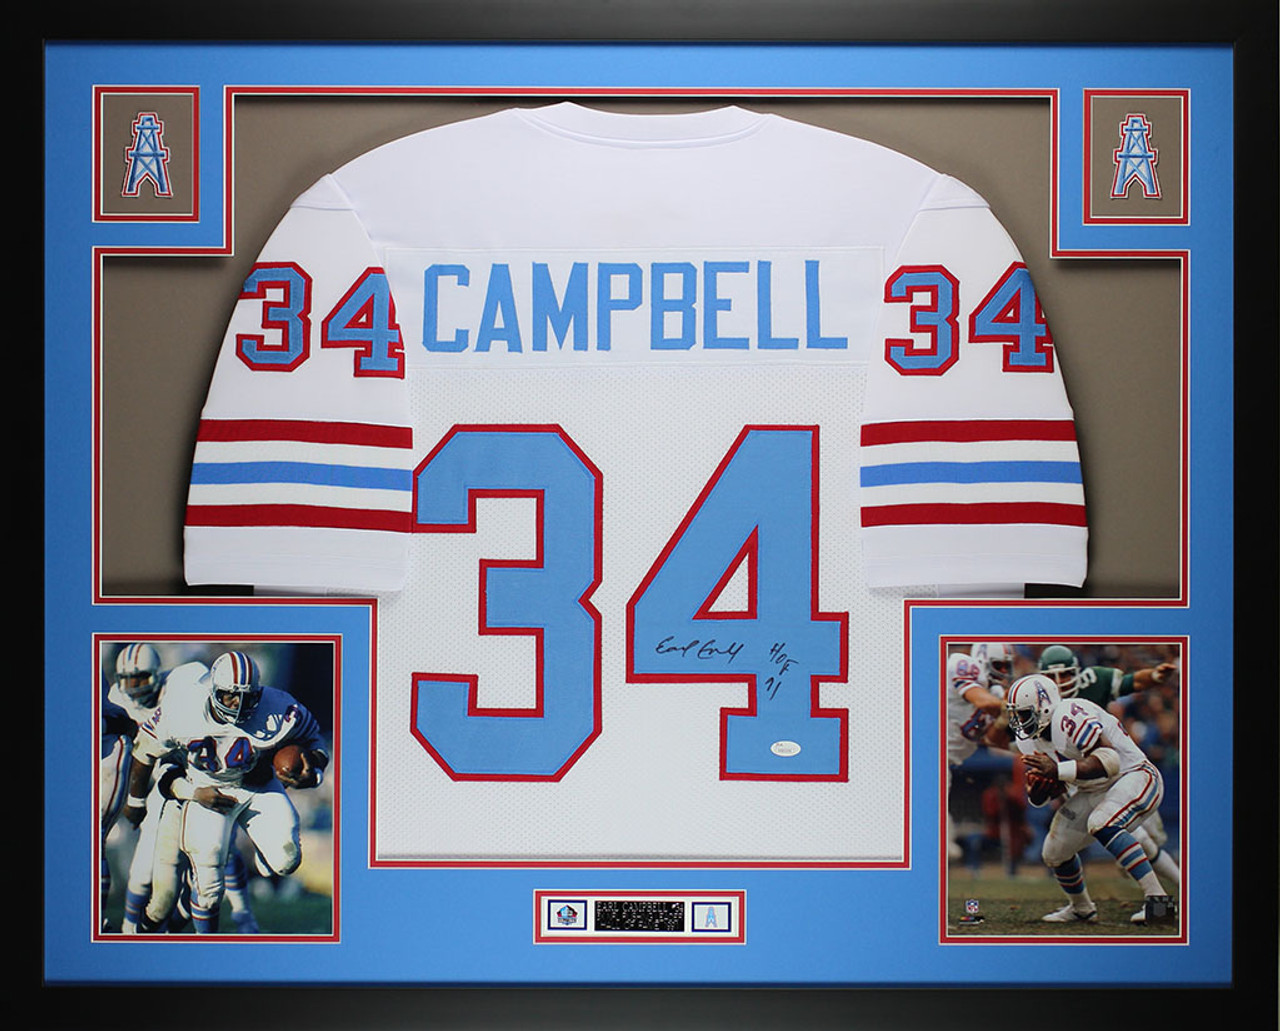 Earl Campbell Jersey